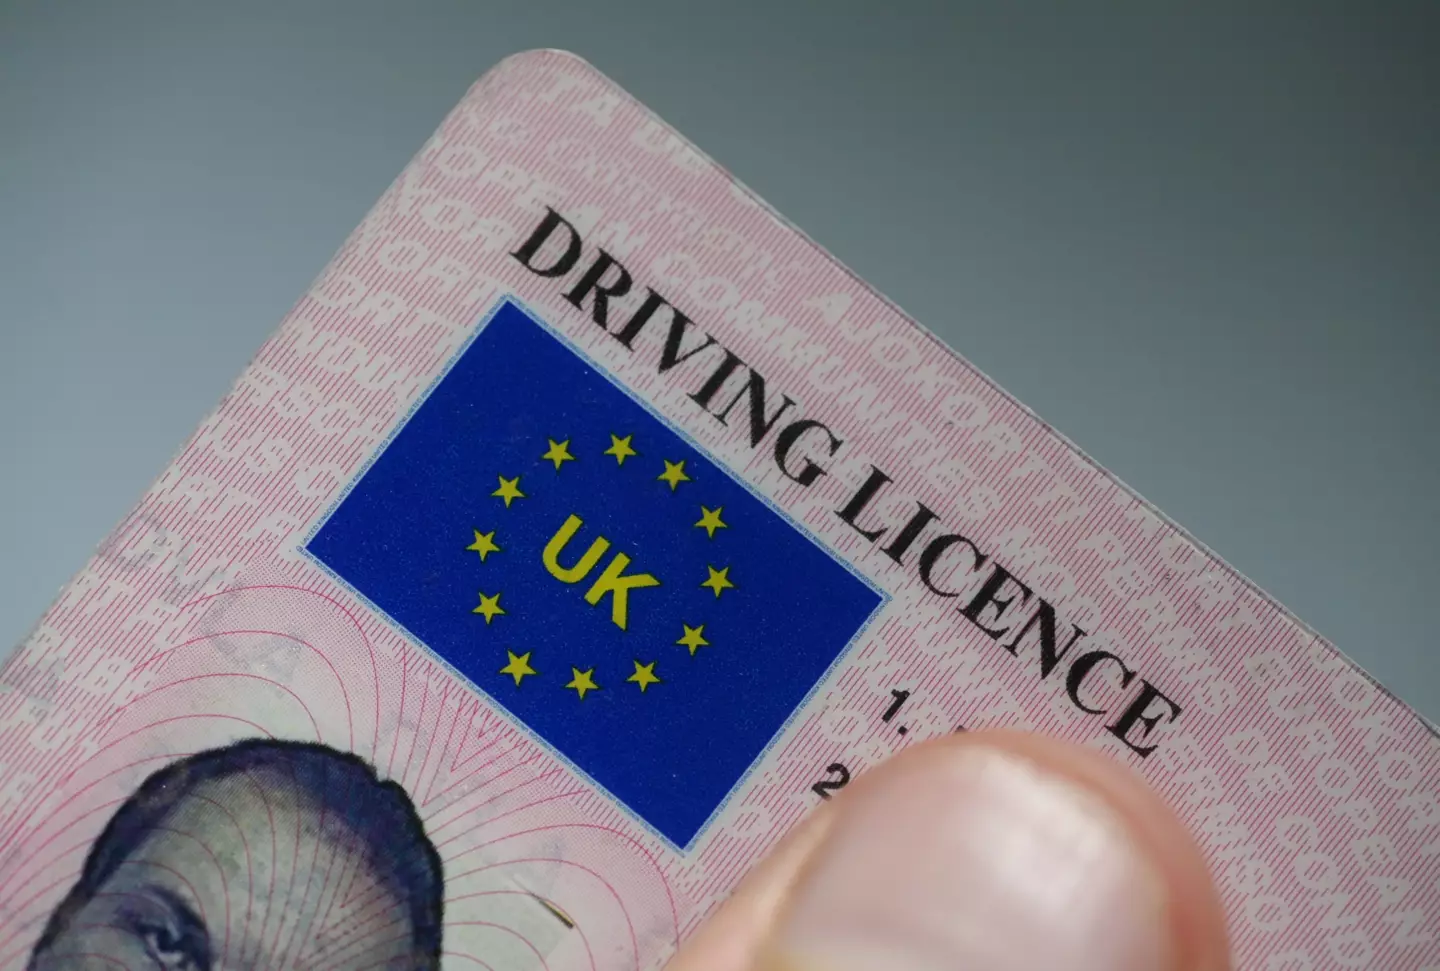 You must renew your driving licence every 10 years.